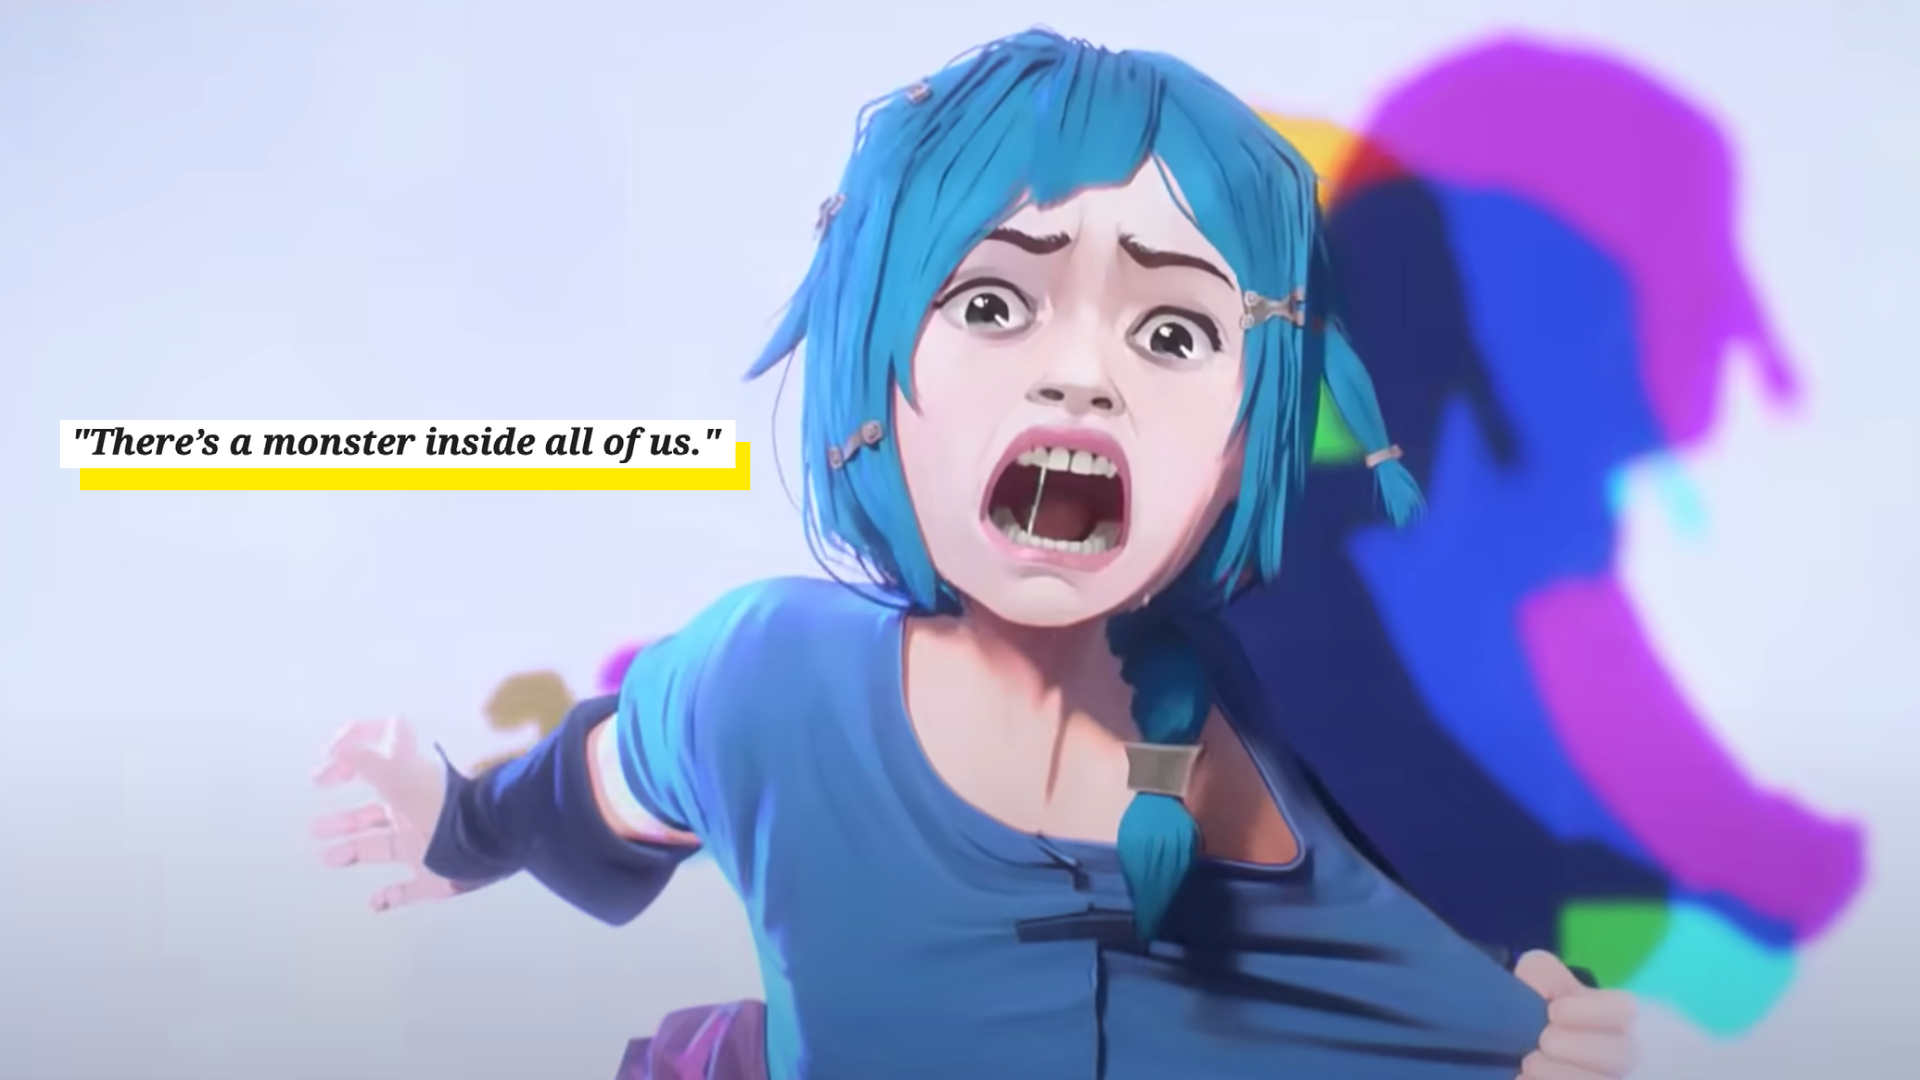 Arcane quotes: The most memorable lines from the LoL anime | ONE Esports